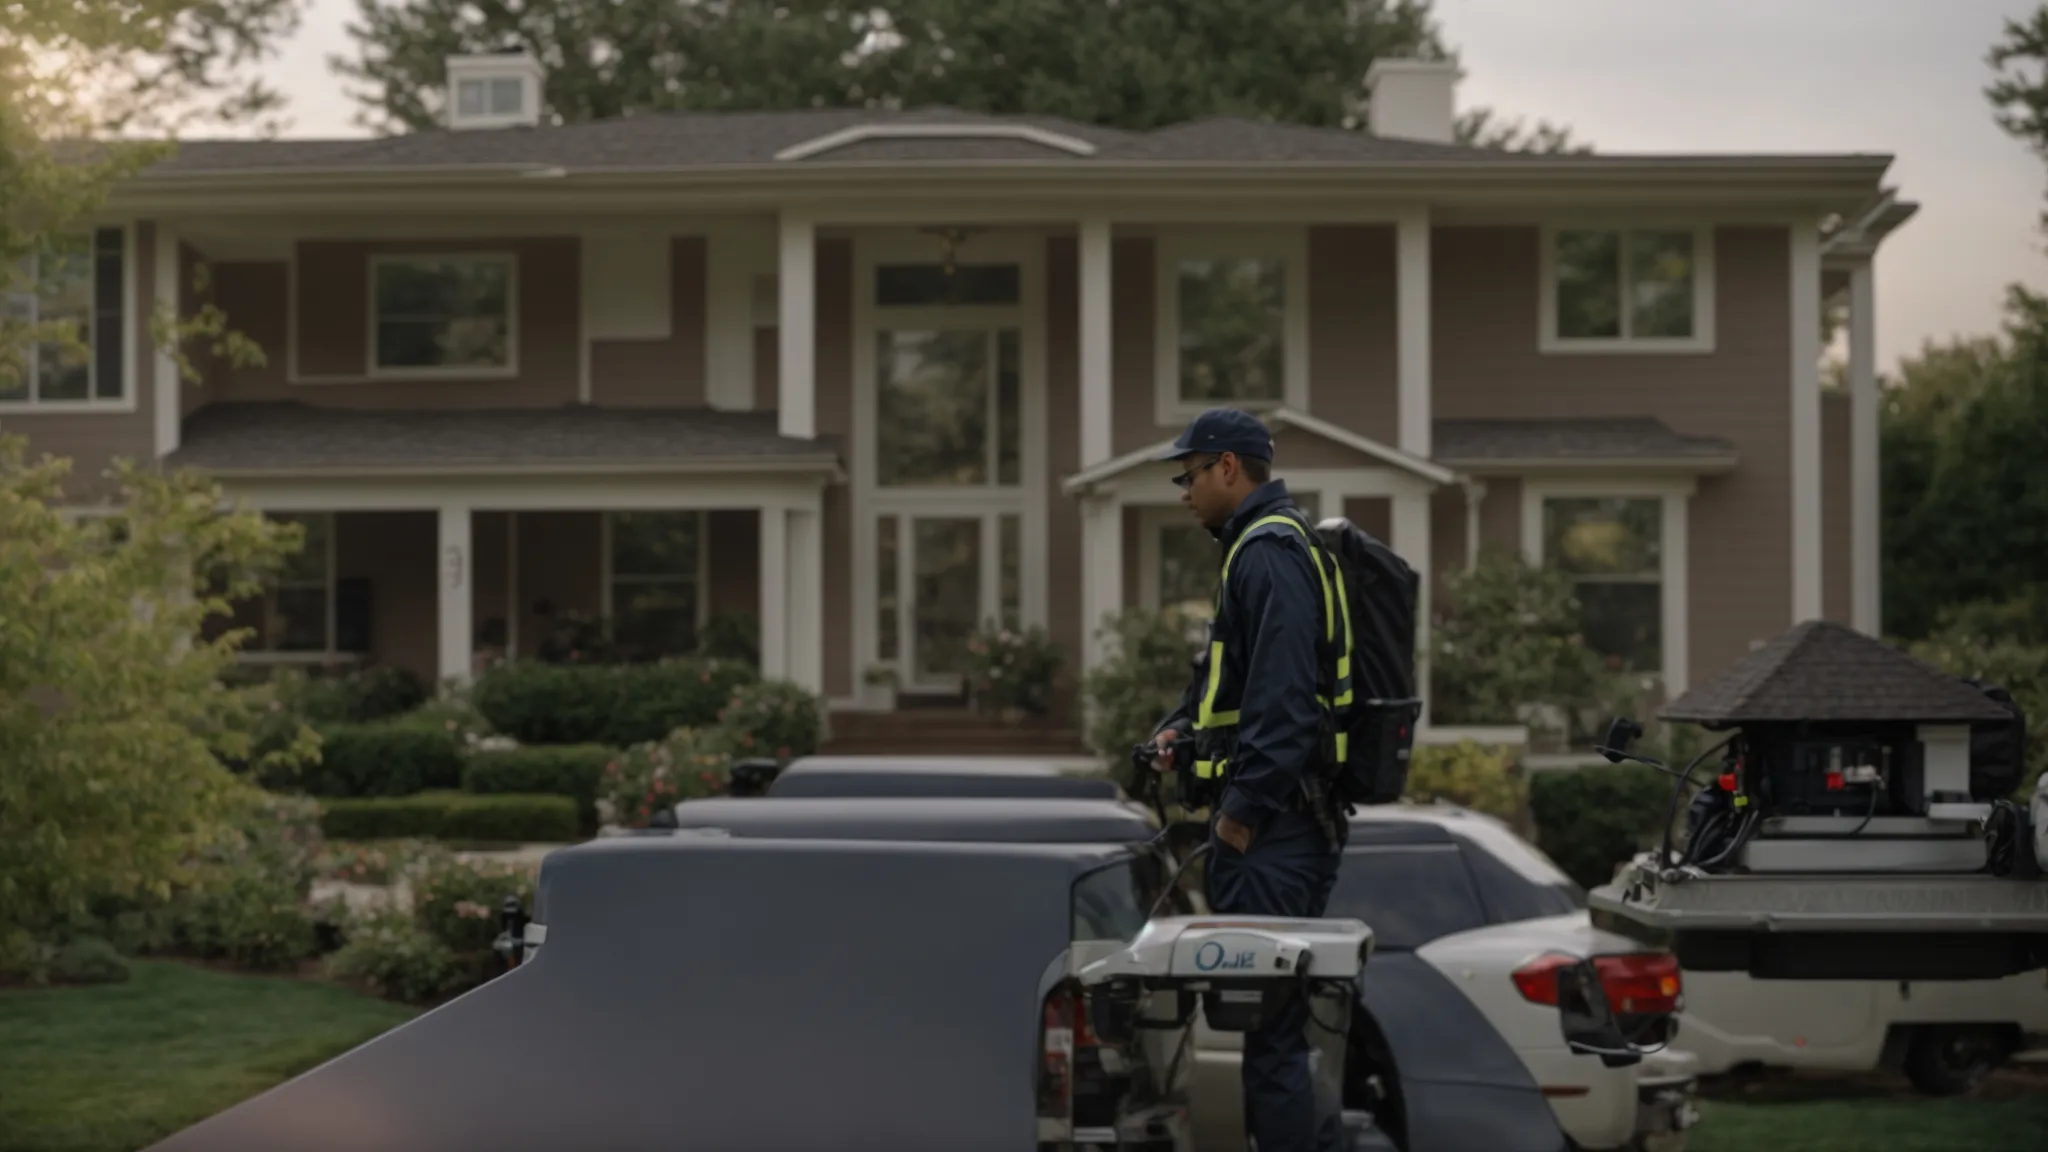 a pest control technician arrives at a suburban home in carmel, indiana, ready to inspect and treat the property.